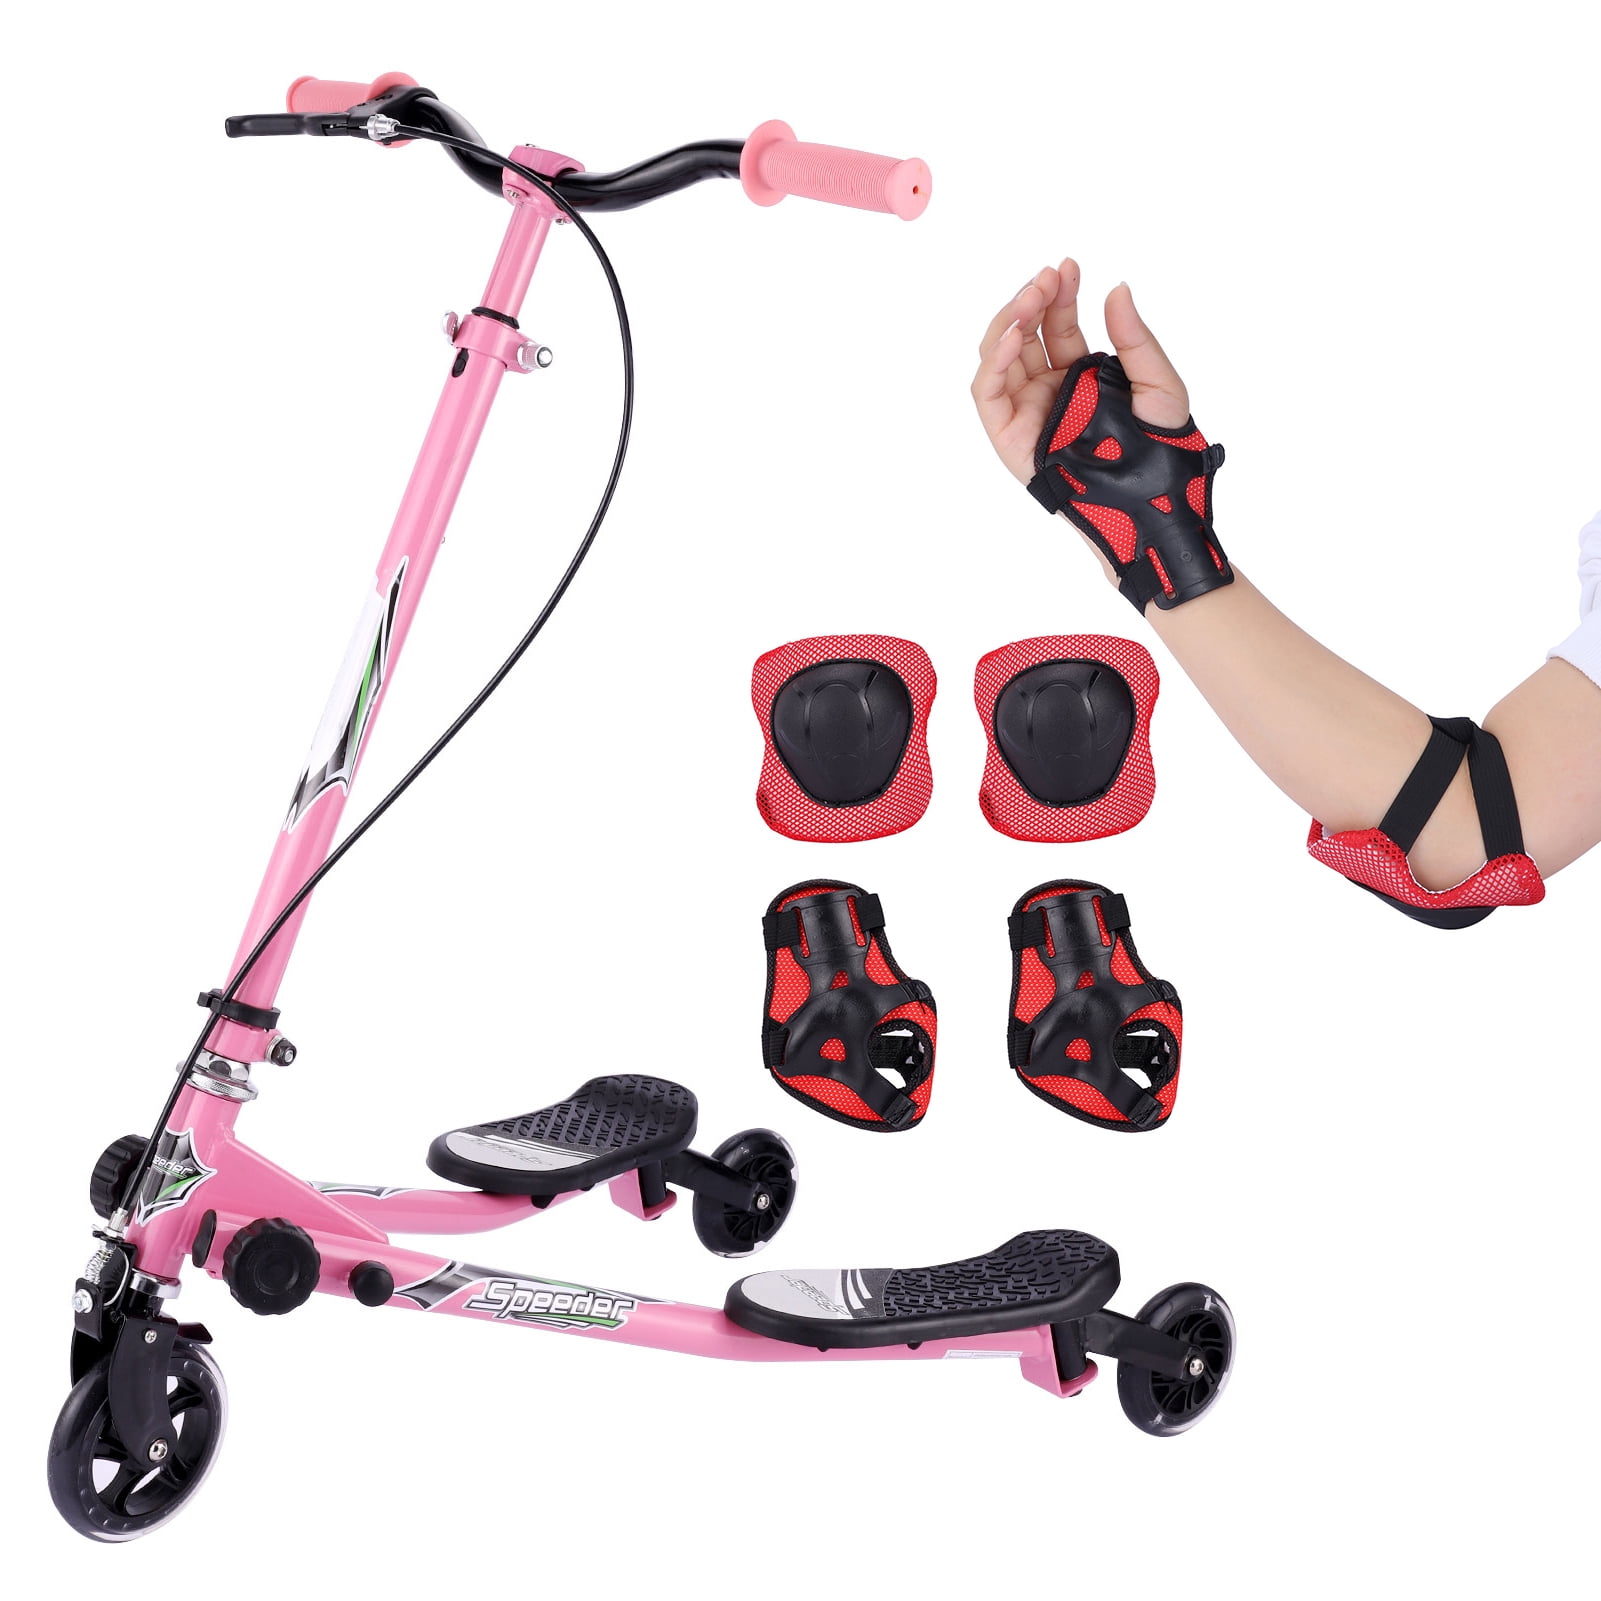 Details about   Folding 3-level Adjustable Kick/Push Scooter PU Wheels for Adults Teens Scooter 